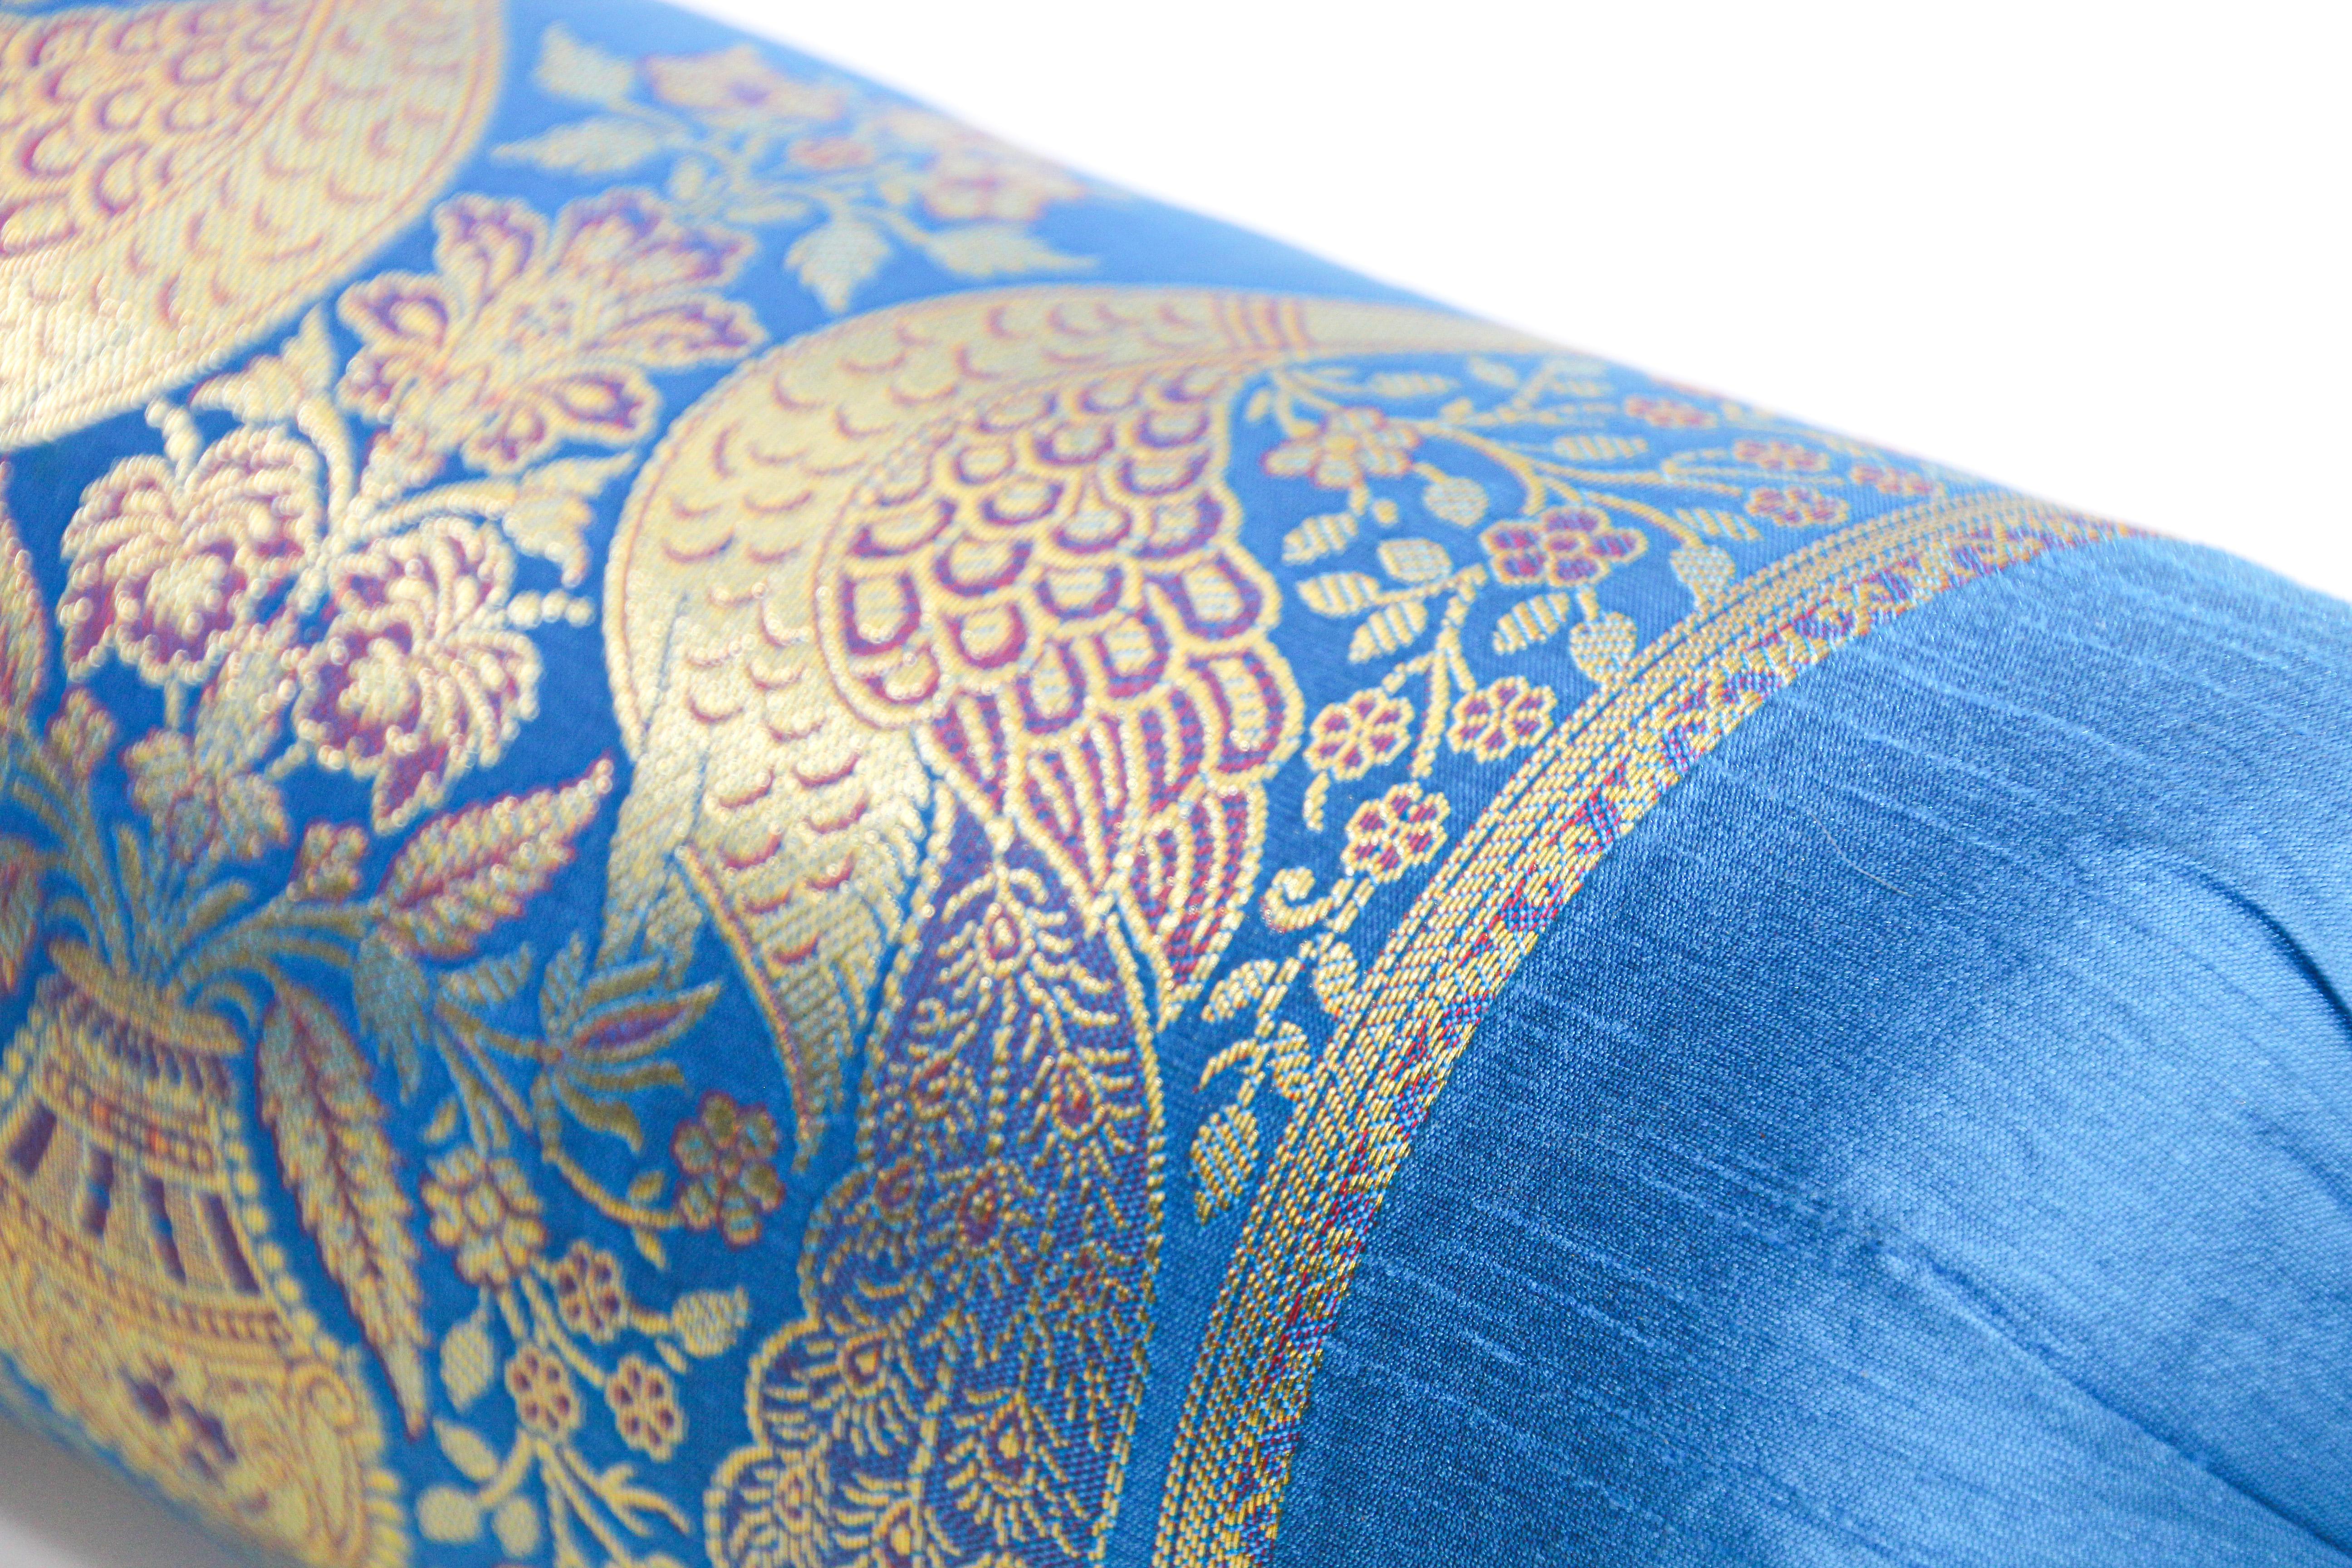 20th Century Vintage Brocade Silk Bolster Pillows Turquoise Blue and Gold Colors with Peacock For Sale